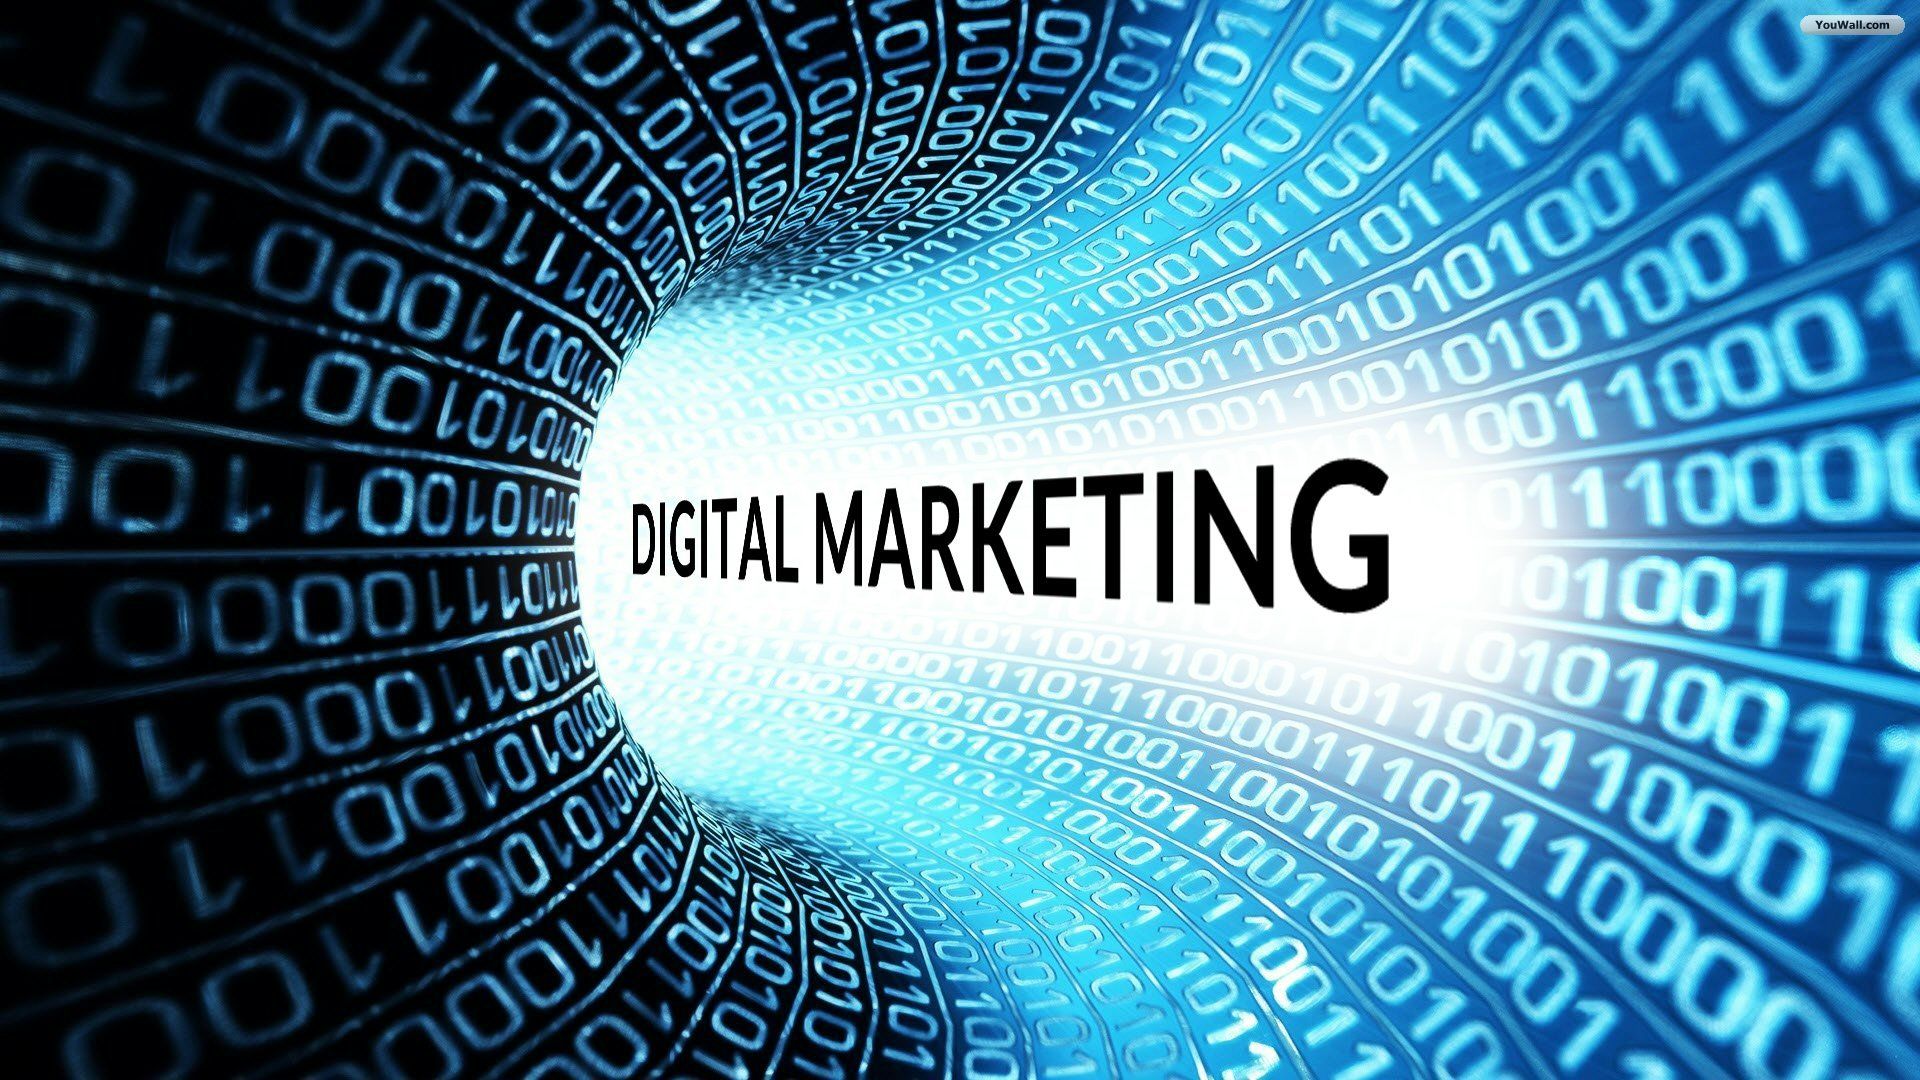 What Are The Advantages Of Inbound B2C Digital Marketing?